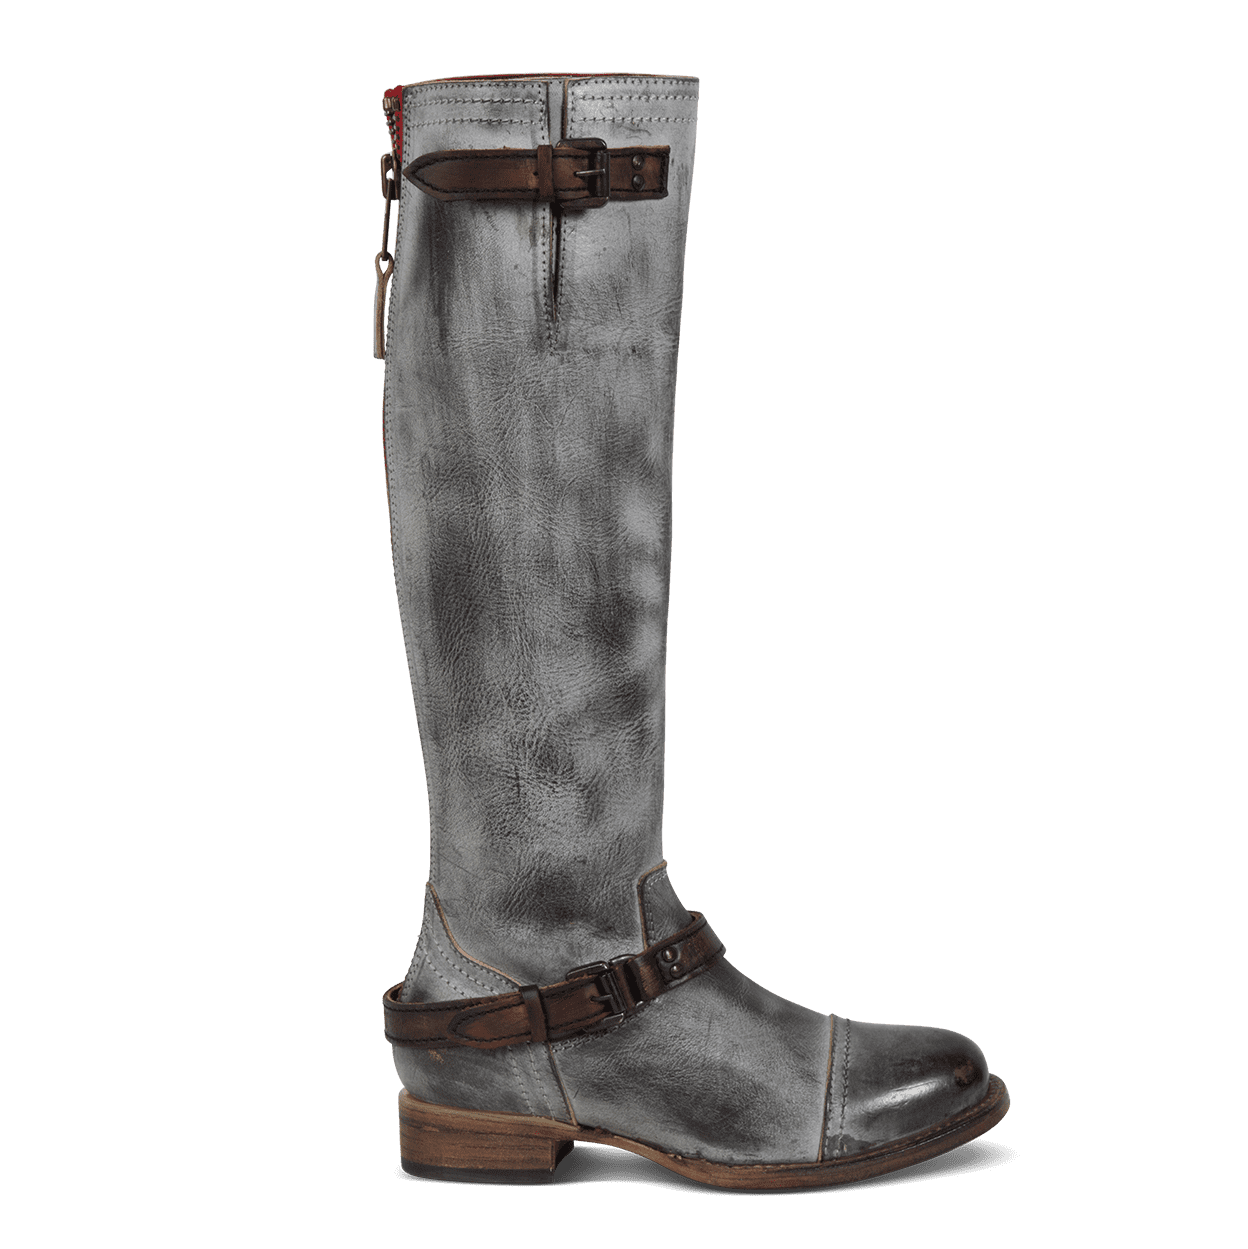 FREEBIRD women's Roadey ice tall construction boot with double buckle detailing and signature red tracked zipper 